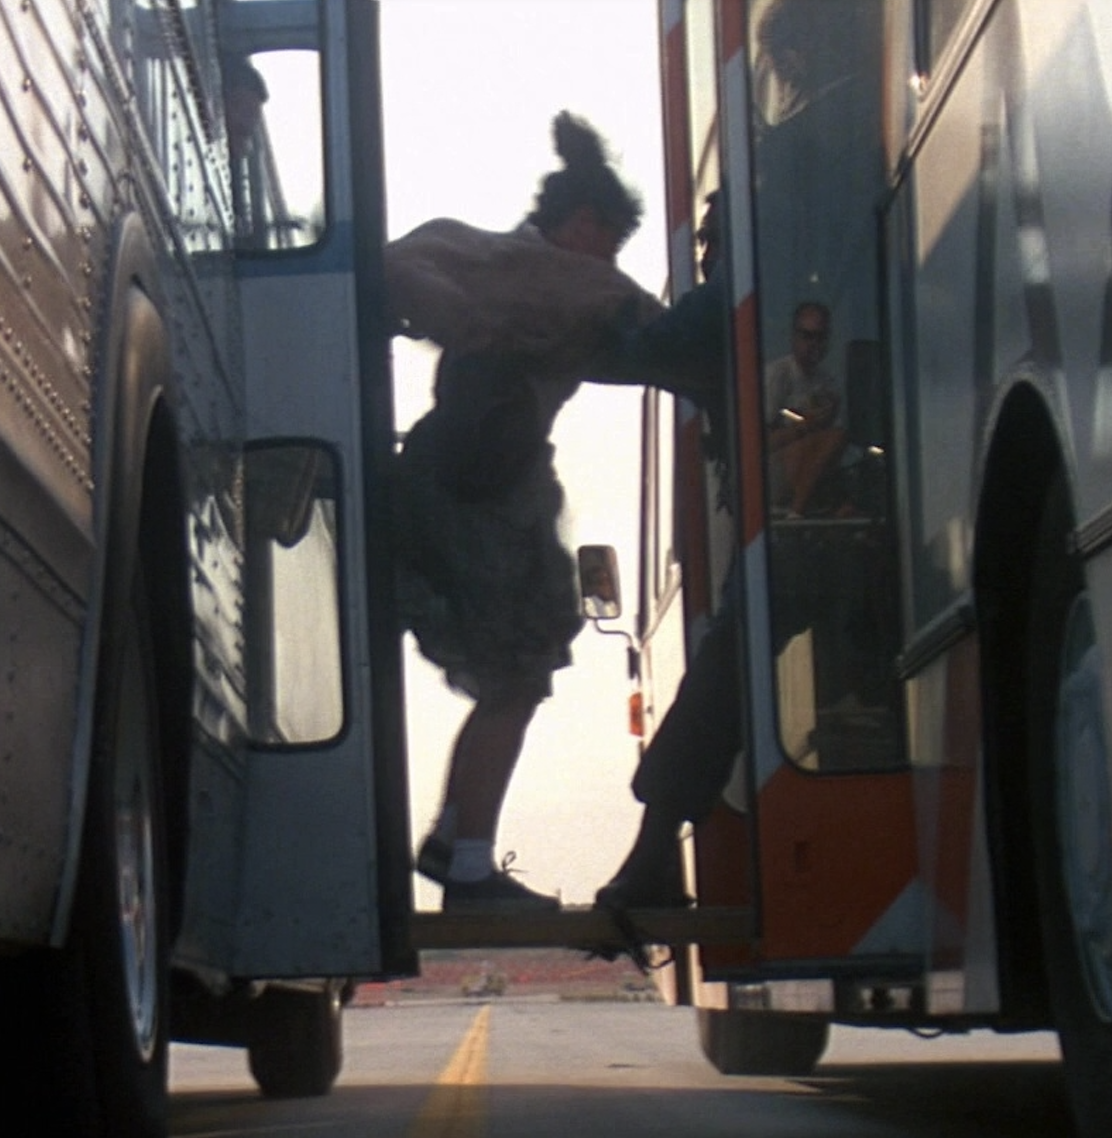 The actors on the bus performed the transfer stunt themselves. (Notice the crew reflected in the door window. Oops!)